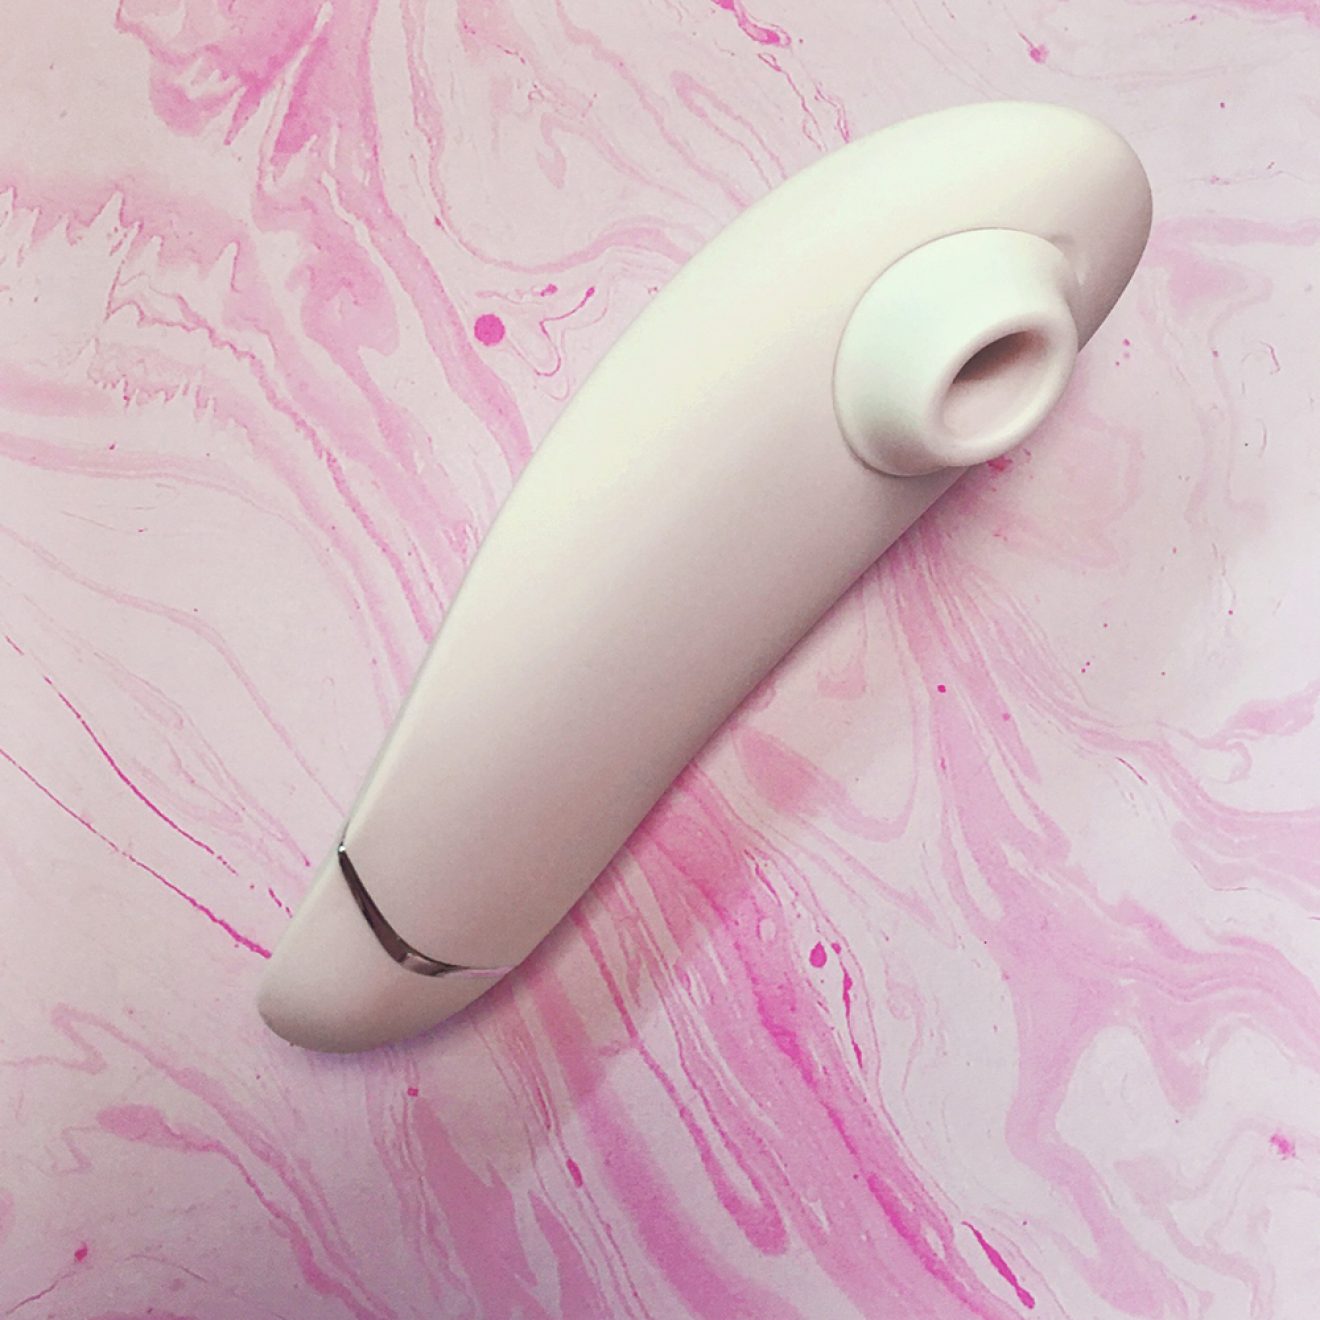 Toy Review - The Premium by Womanizer